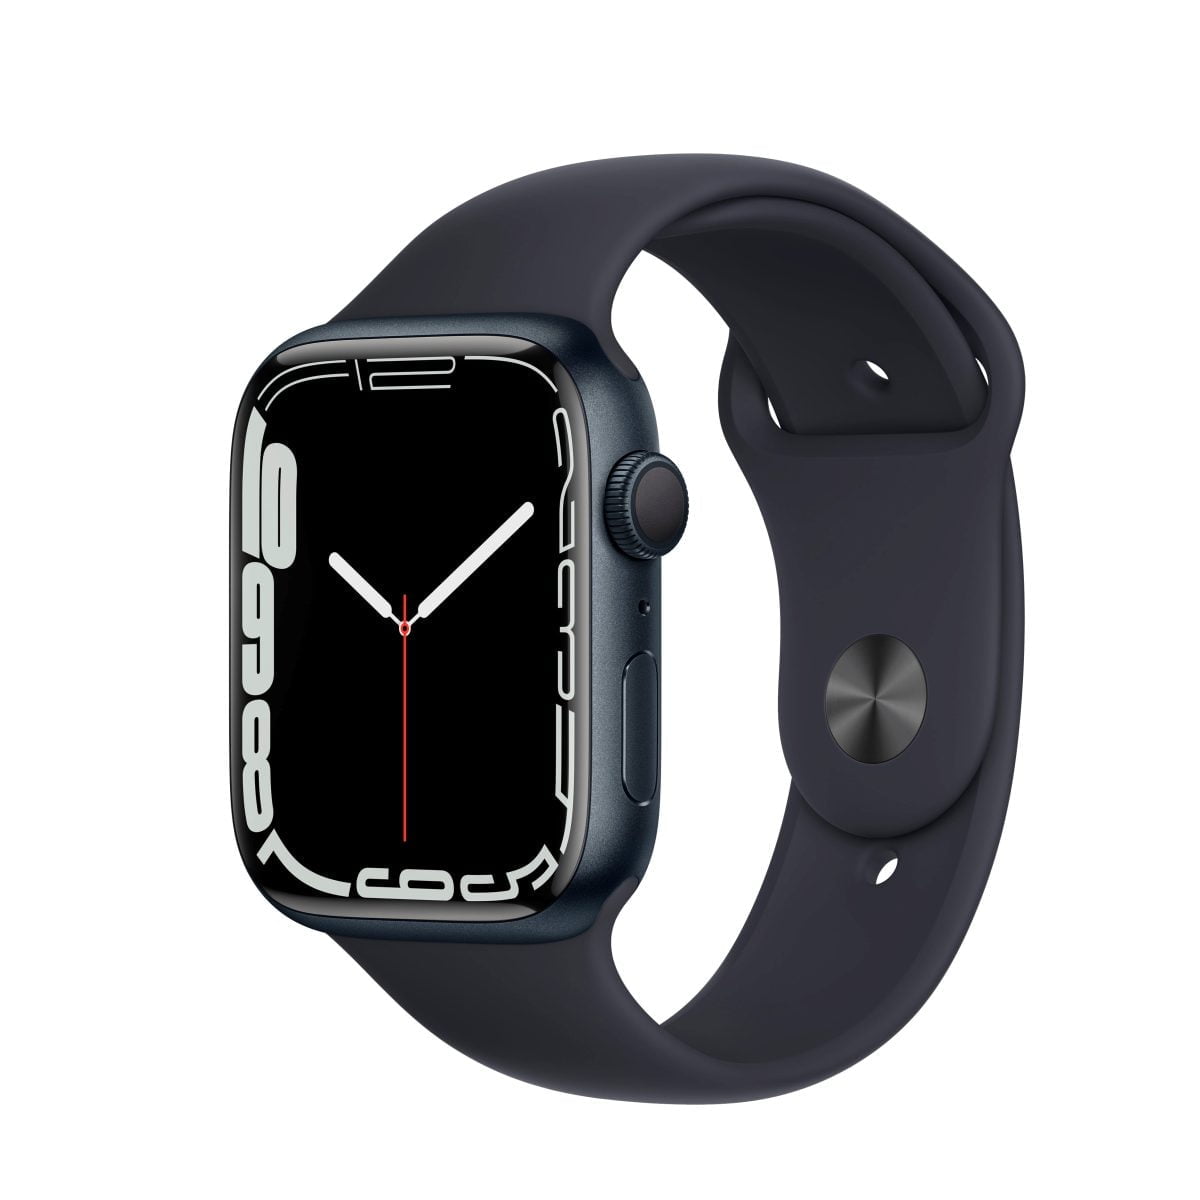 6215938 Sd Scaled Apple &Amp;Lt;H1 Class=&Amp;Quot;Heading-5 V-Fw-Regular&Amp;Quot;&Amp;Gt;Apple Watch Series 7 (Gps) 45Mm Midnight Aluminum Case With Midnight Sport Band - Midnight&Amp;Lt;/H1&Amp;Gt; &Amp;Lt;H2&Amp;Gt;Model : Mkn53&Amp;Lt;/H2&Amp;Gt; Https://Www.youtube.com/Watch?V=Mmdq-Gwbnze &Amp;Lt;Div Class=&Amp;Quot;Long-Description-Container Body-Copy &Amp;Quot;&Amp;Gt; &Amp;Lt;Div Class=&Amp;Quot;Html-Fragment&Amp;Quot;&Amp;Gt; &Amp;Lt;Div&Amp;Gt; &Amp;Lt;Div&Amp;Gt;The Largest, Most Advanced Always-On Retina Display Yet Makes Everything You Do With Your Apple Watch Series 7 Bigger And Better. Series 7 Is The Most Durable Apple Watch Ever Built, With An Even More Crack-Resistant Front Crystal. Advanced Features Let You Measure Your Blood Oxygen Level,¹ Take An Ecg Anytime, And Access Mindfulness And Sleep Tracking Apps. You Can Also Track Dozens Of Workouts, Including New Tai Chi And Pilates.&Amp;Lt;/Div&Amp;Gt; &Amp;Lt;/Div&Amp;Gt; &Amp;Lt;/Div&Amp;Gt; &Amp;Lt;/Div&Amp;Gt; Apple Watch Apple Watch Series 7 (Gps) 45Mm - Midnight